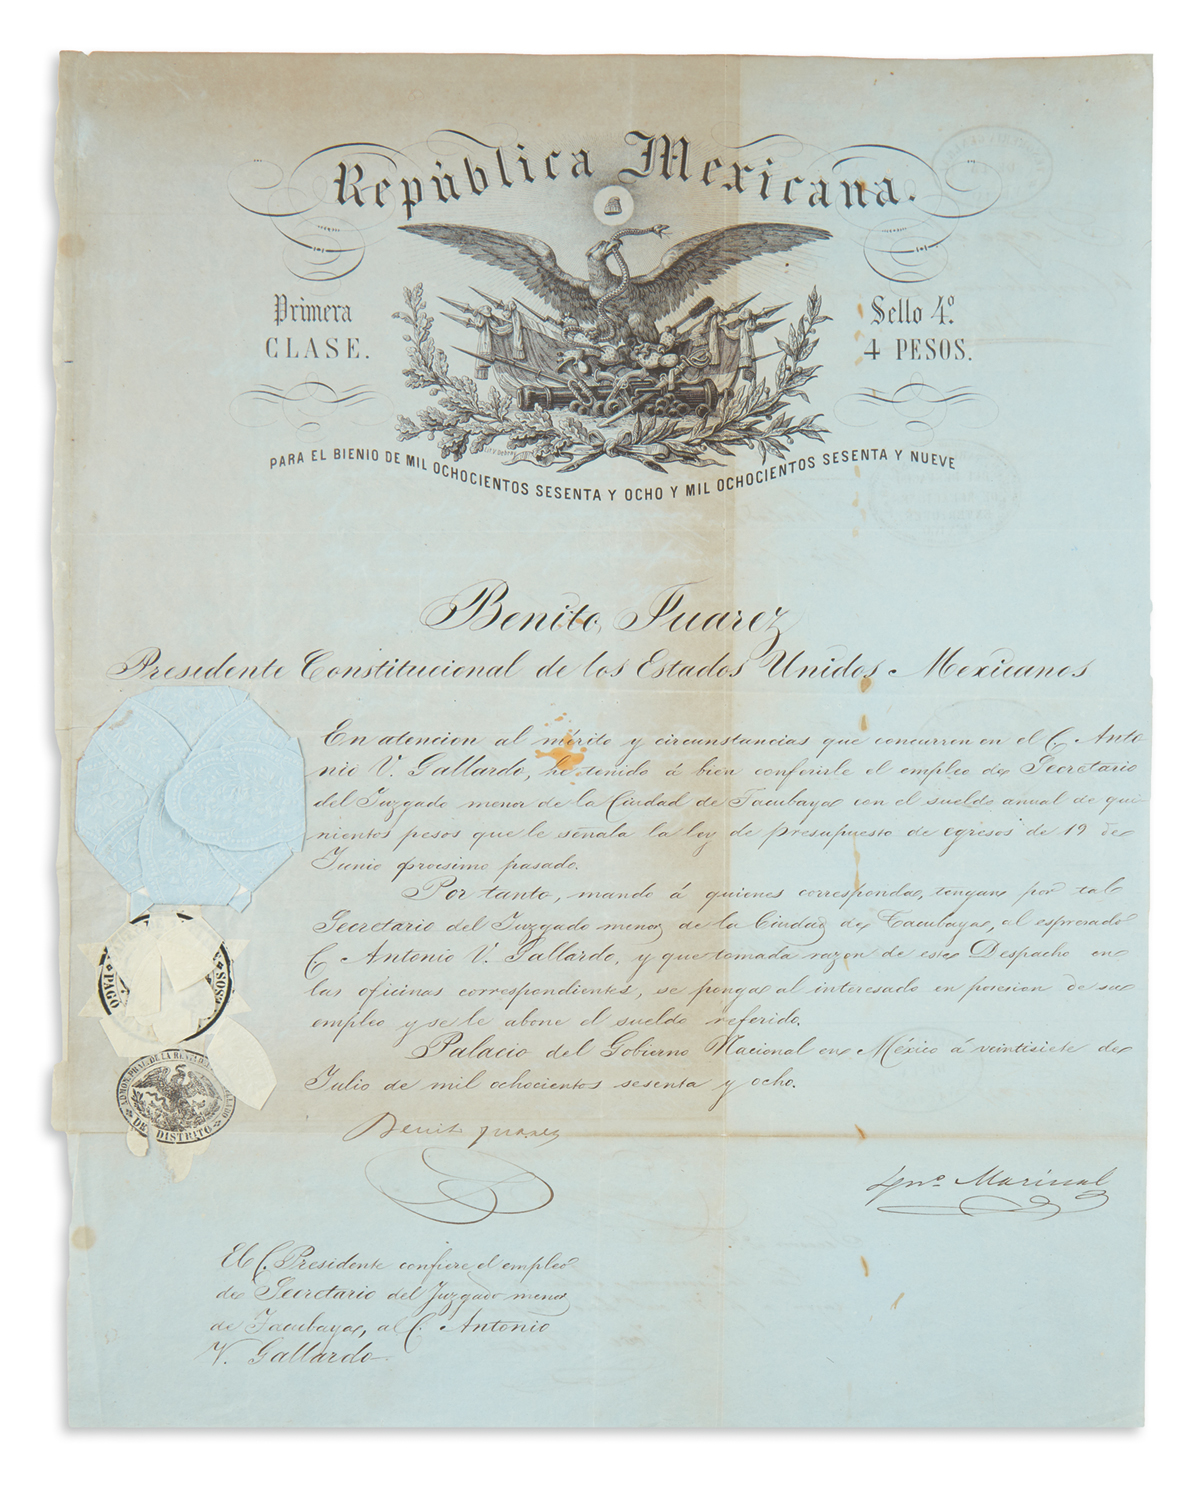 JUÁREZ, BENITO. Partly-printed Document Signed, as President, appointing C. Antonio V. Gollardo Secretary of the minor court in the cit